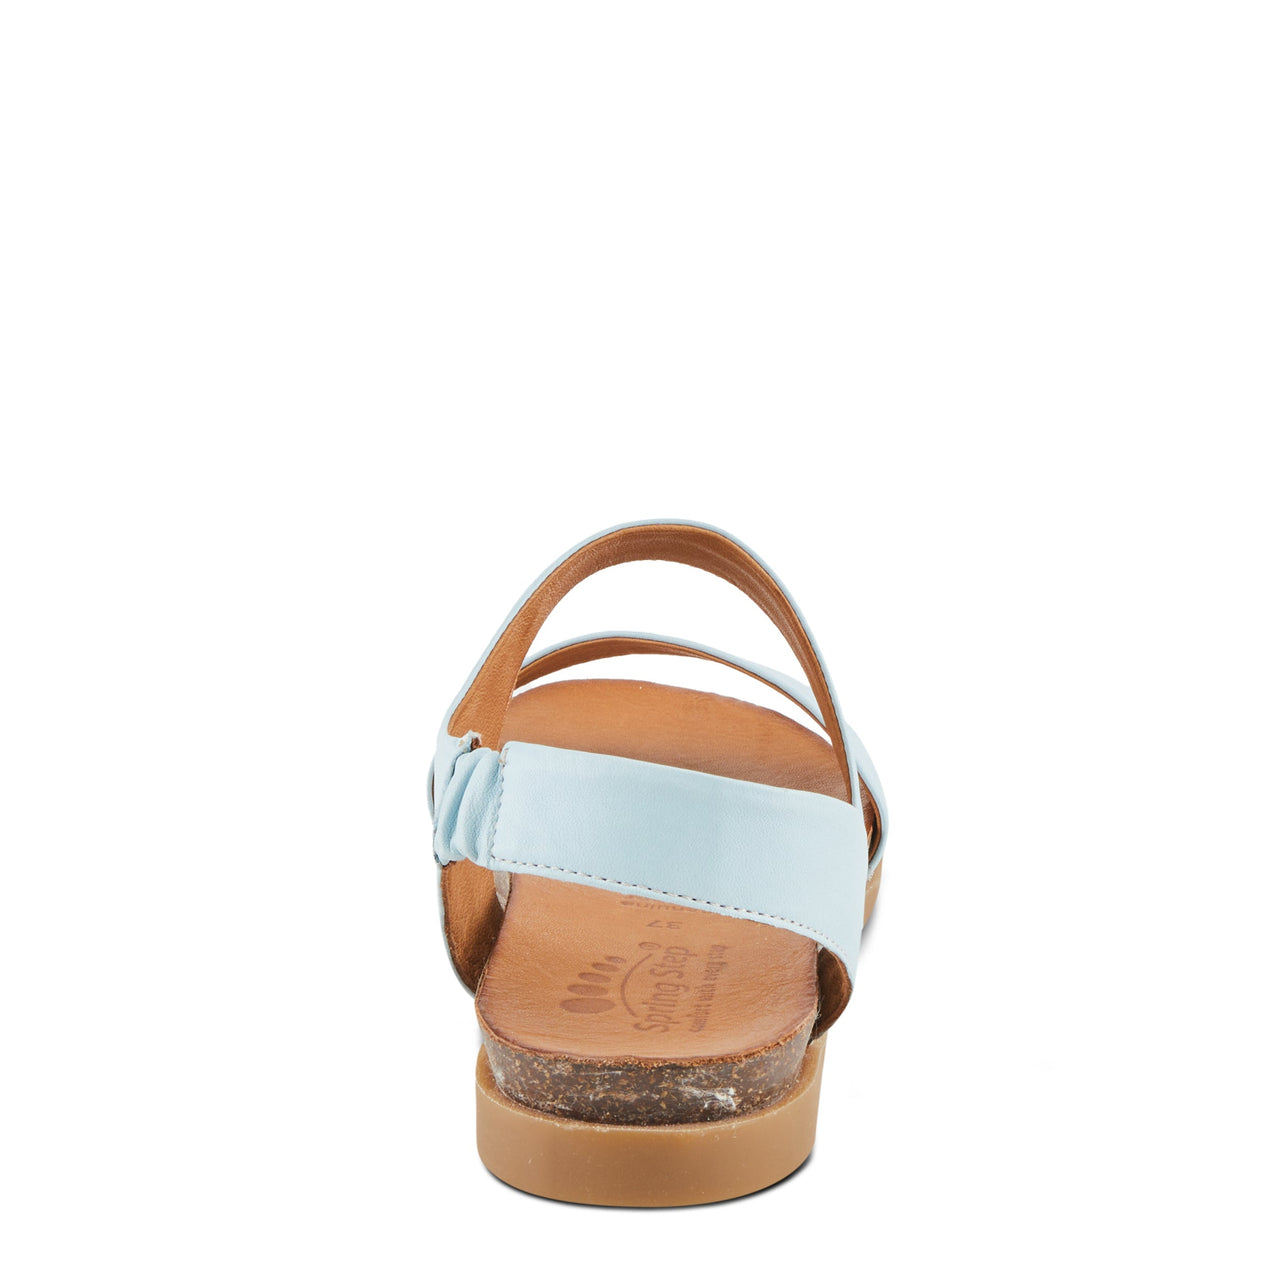 Stylish and comfortable Spring Step Besitos sandals designed with a cushioned footbed and adjustable strap for all-day wear